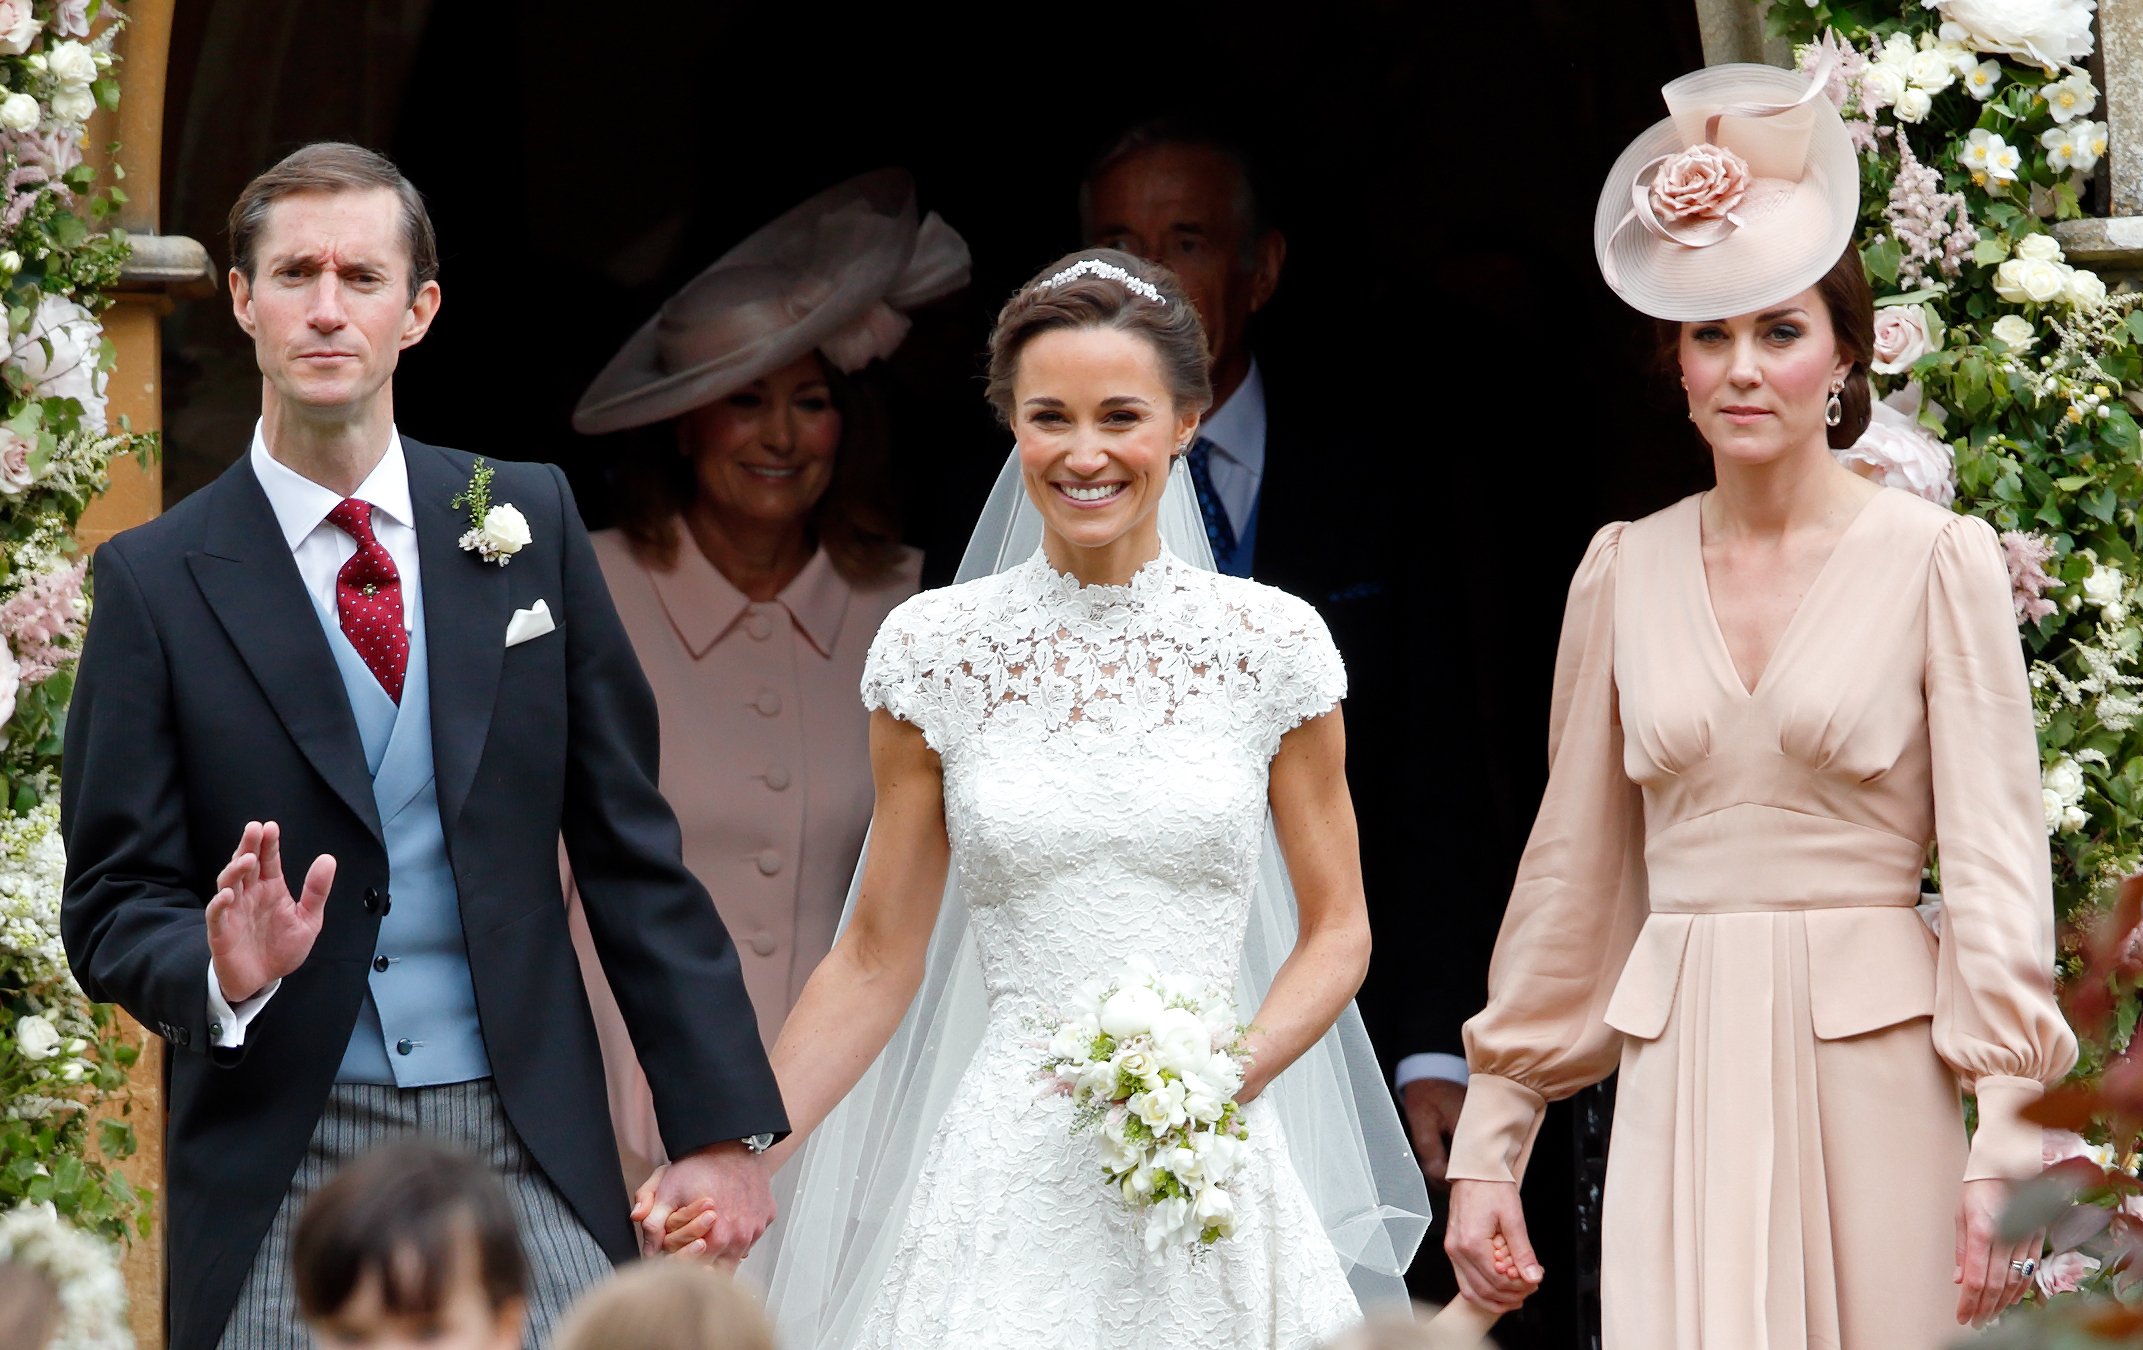 James Matthews and Pippa Middleton leave St. Mark's Church along with Catherine, Duchess of Cambridge after their wedding on May 20, 2017 in Englefield Green, England. | Source: Getty Images